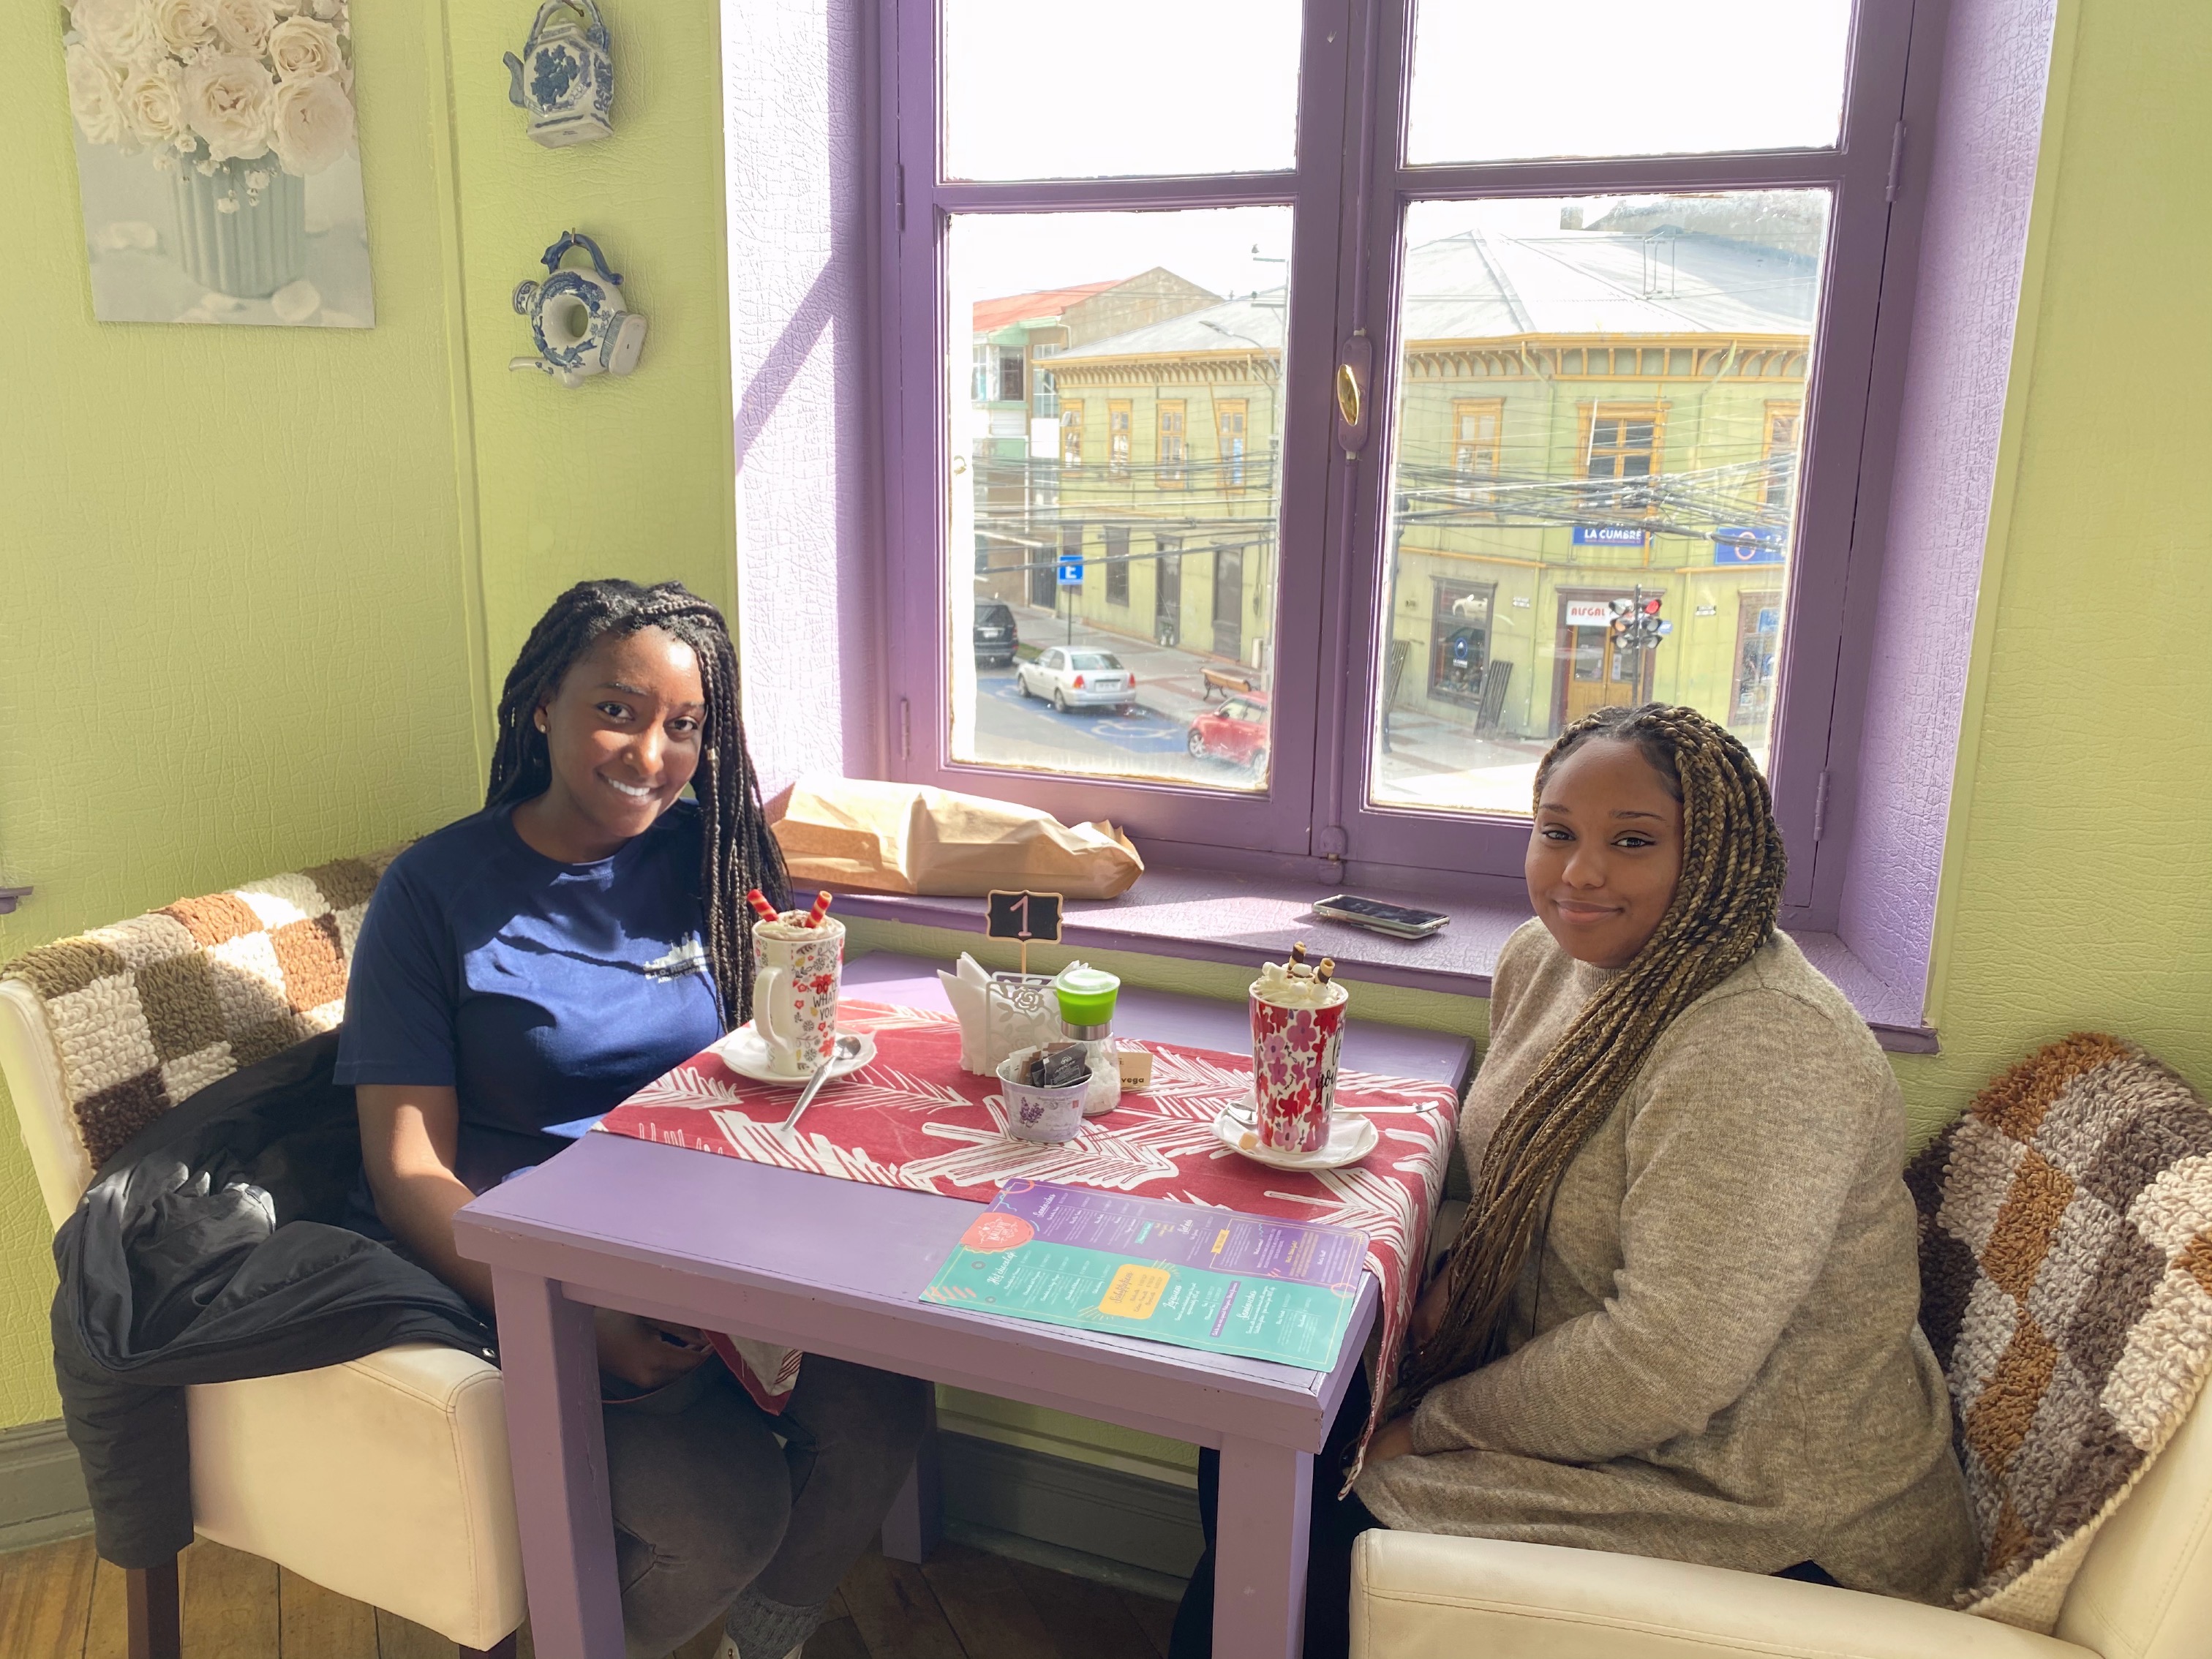 Jazmyn and Rua in the Kallfü Cafe in Punta Arenas, Chile. Feb. 28, 2020